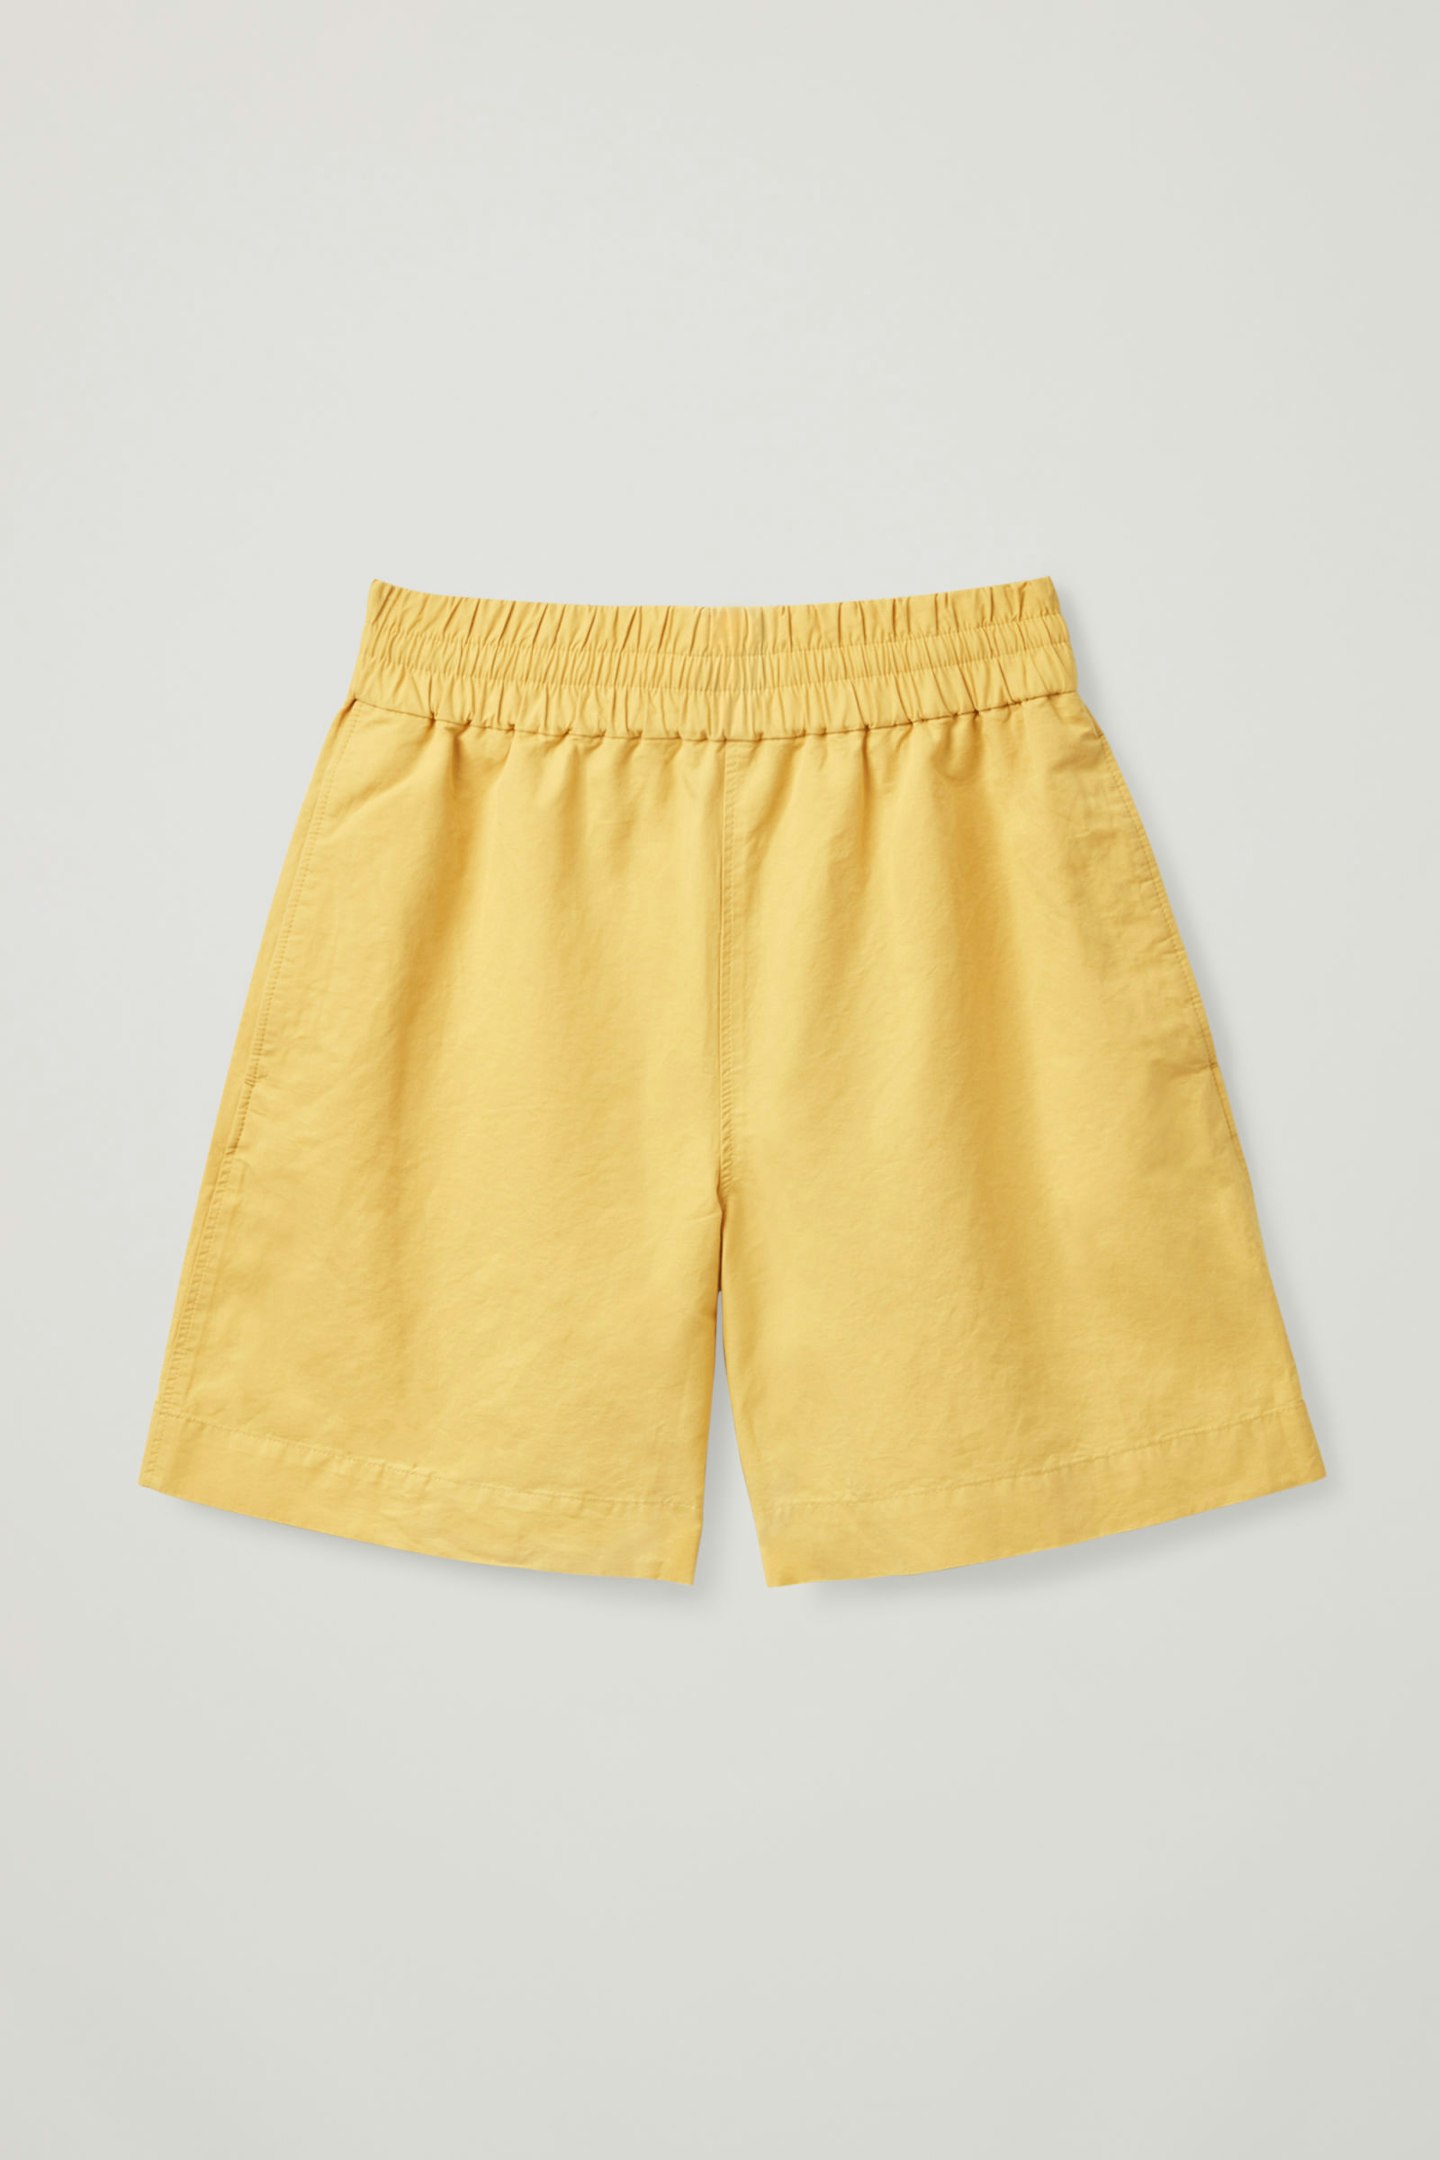 COS, Relaxed Fit Shorts, £45